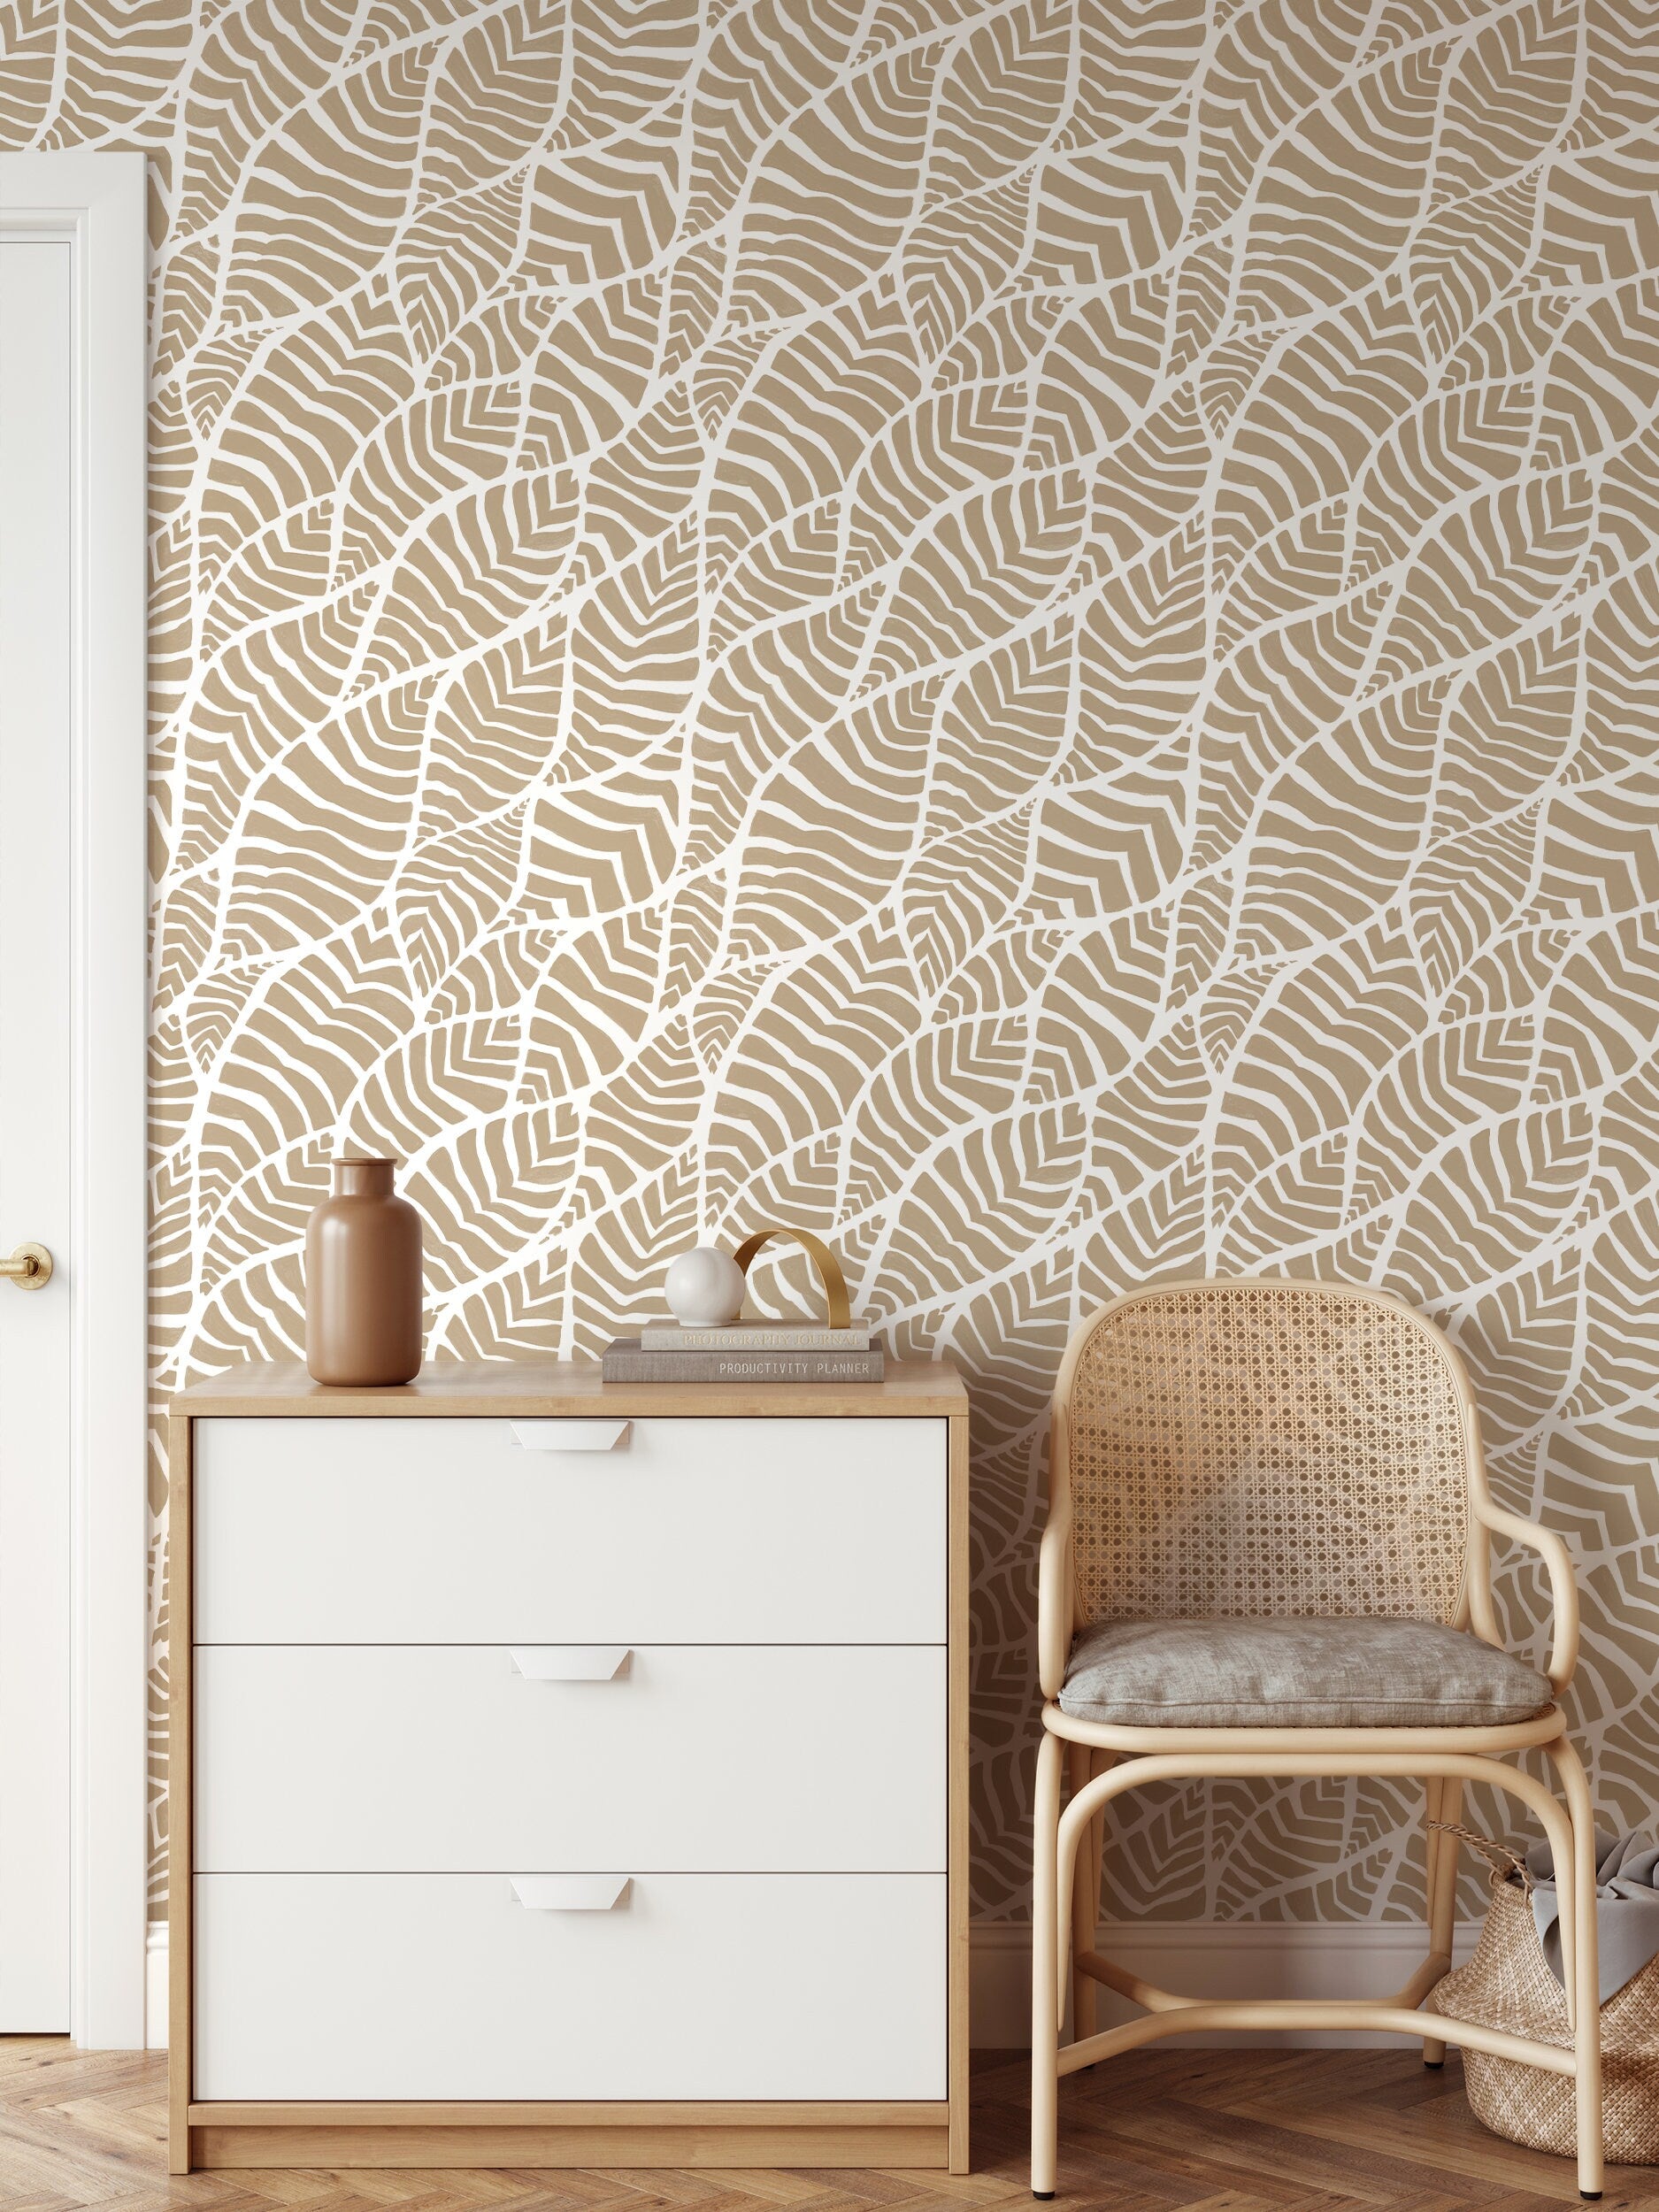 Beige Boho Abstract Leaf Wallpaper / Peel and Stick Wallpaper Removable Wallpaper Home Decor Wall Art Wall Decor Room Decor - C958